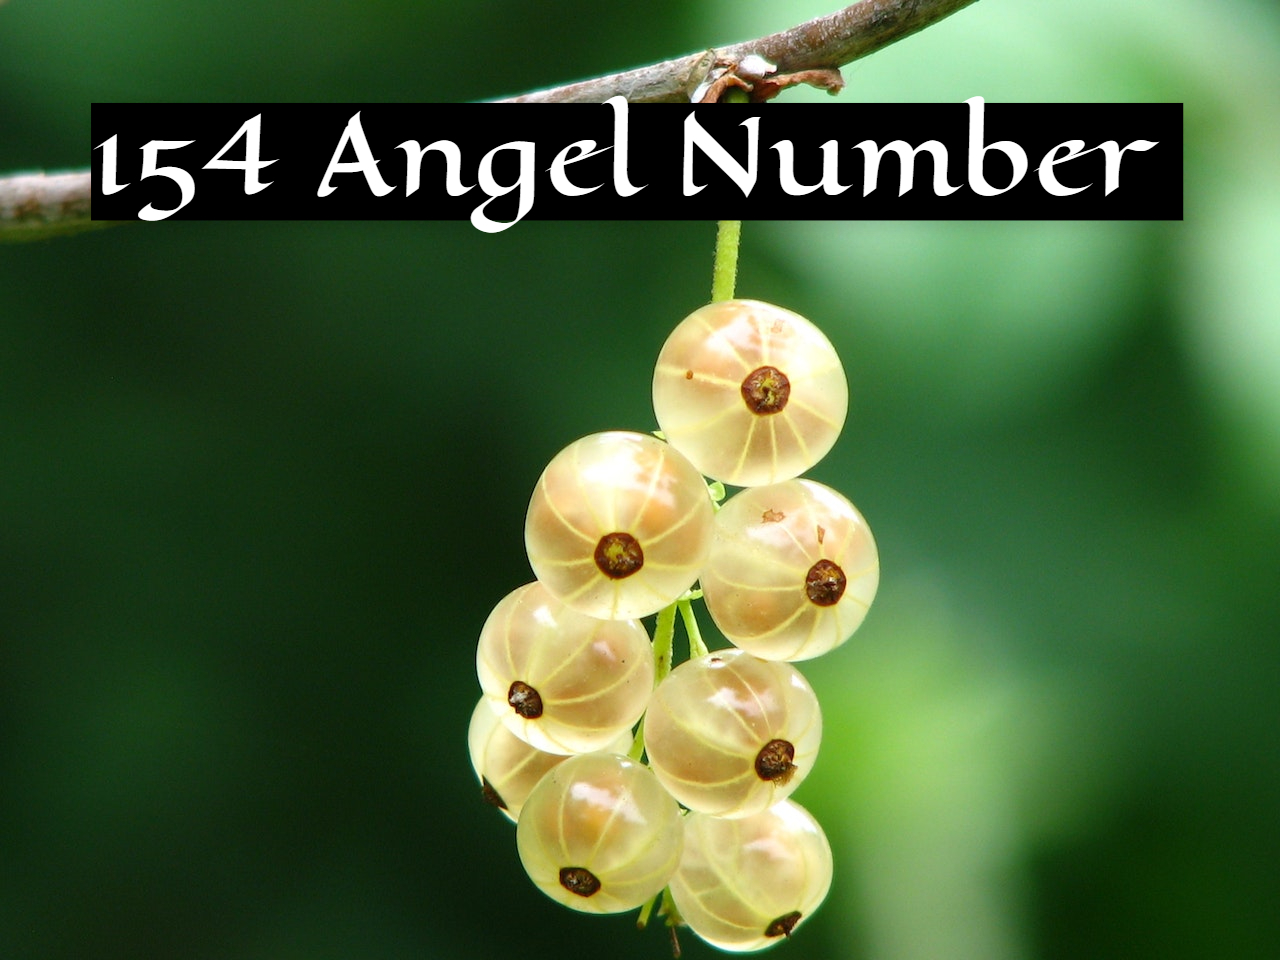 154 Angel Number - Meaning & Twin Flame